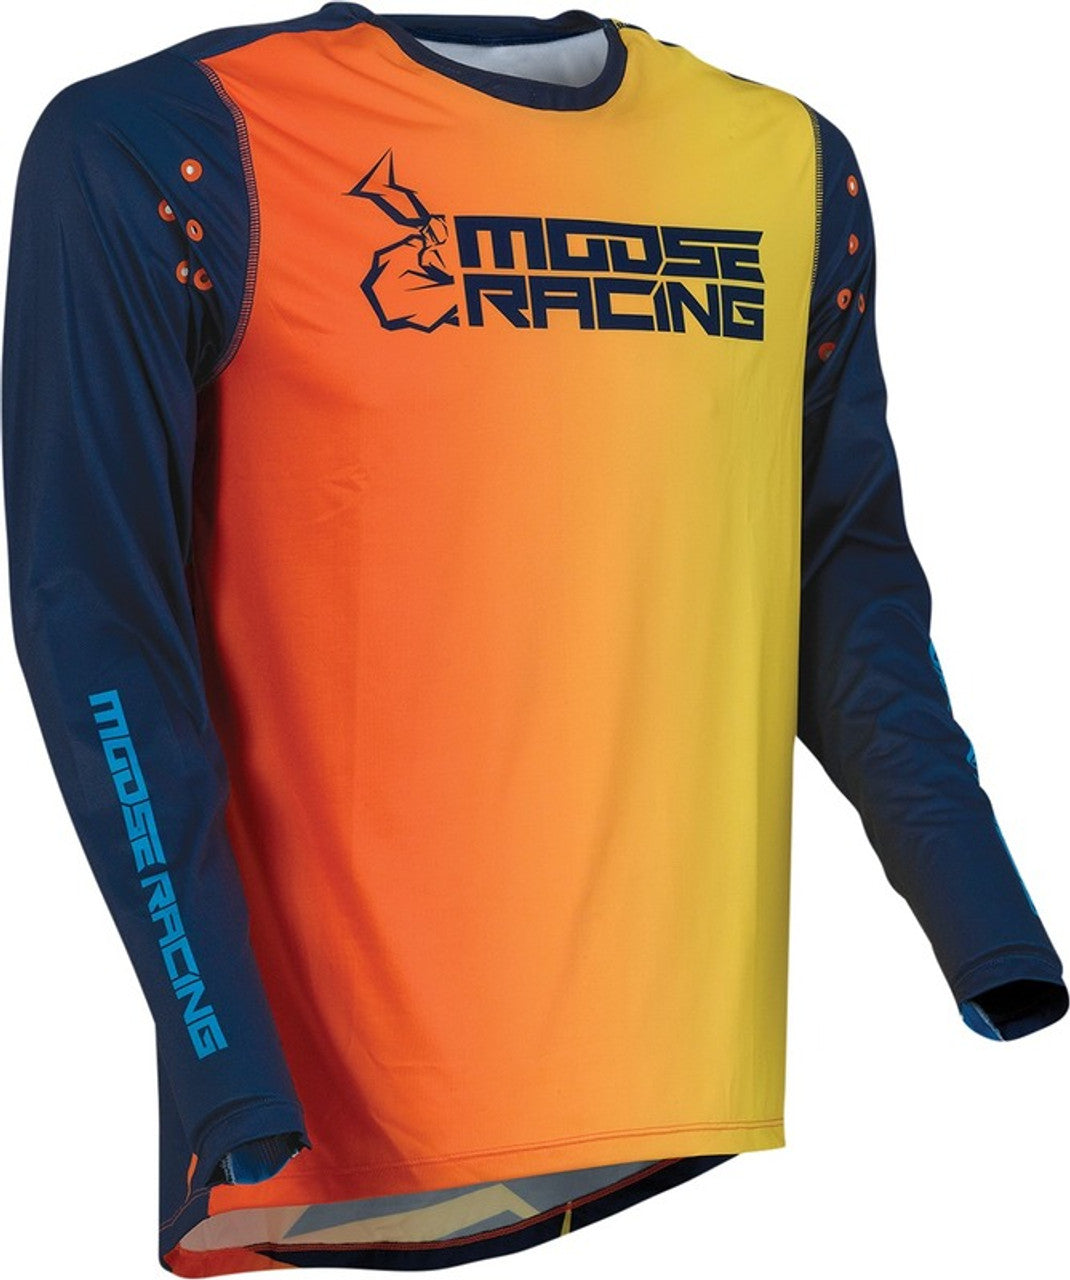 MOOSE RACING JERSEY AGROID NV/OR MD